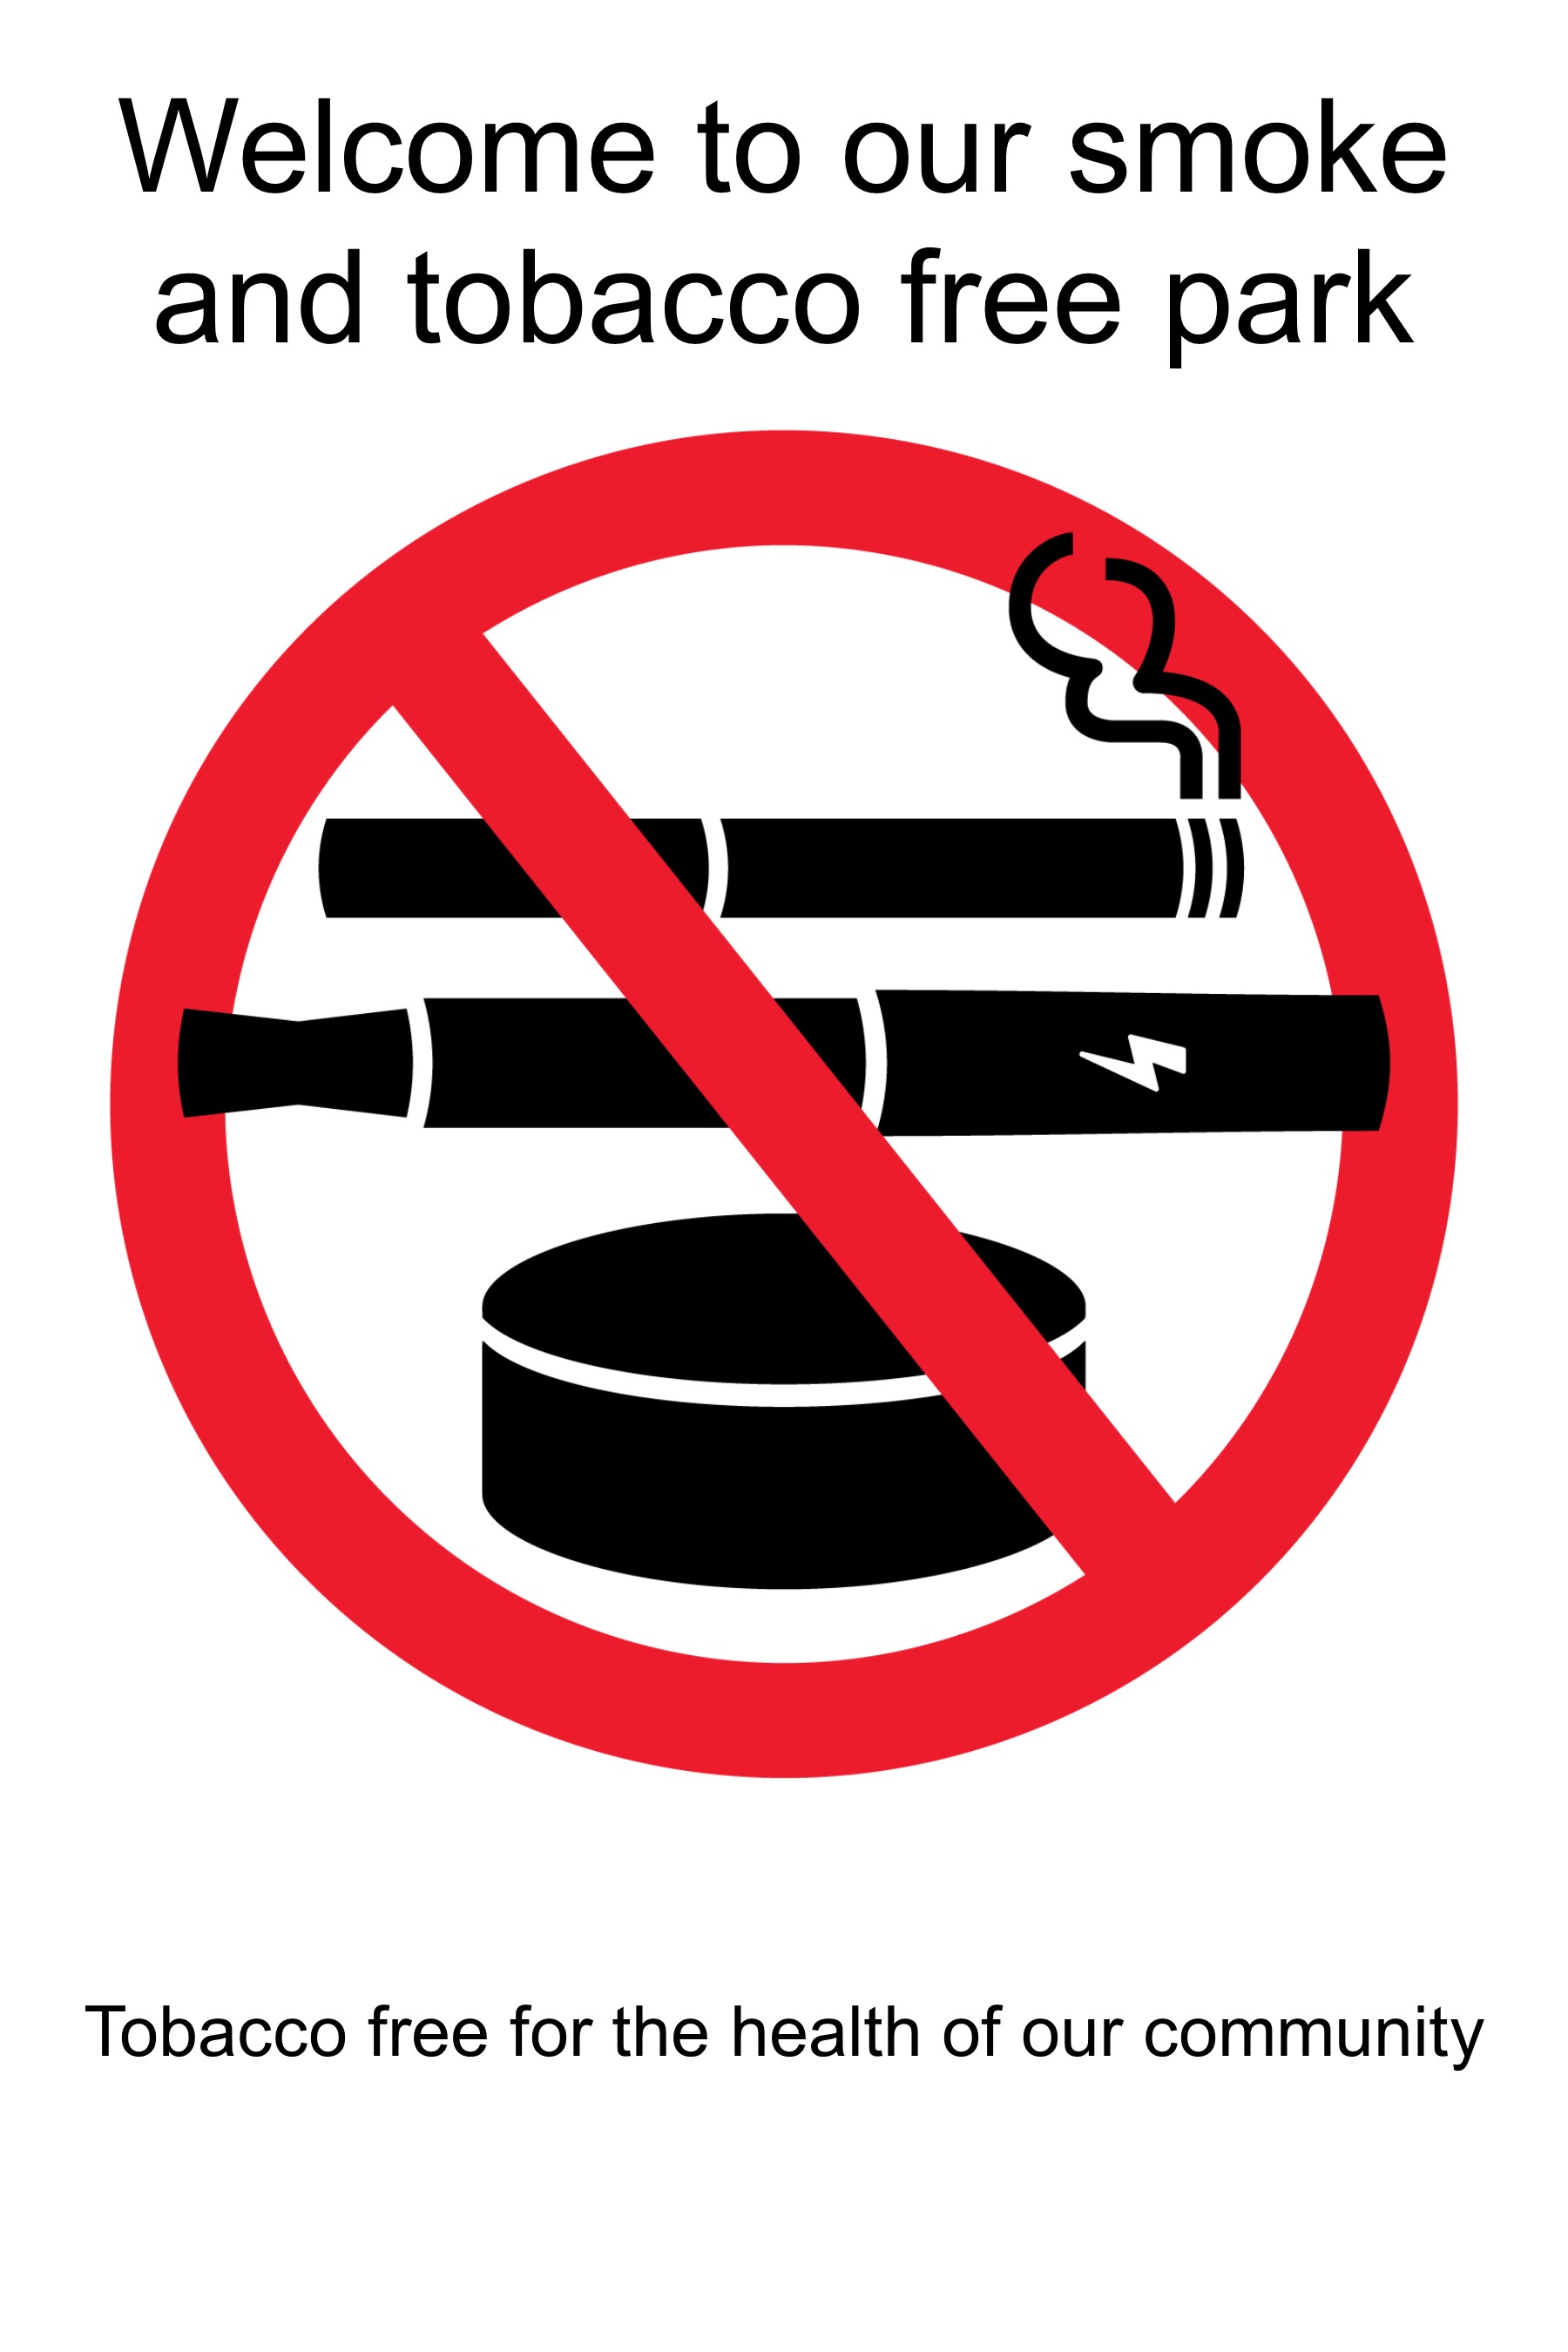 Red circle with picture of tobacco products , red diagonal line across circle